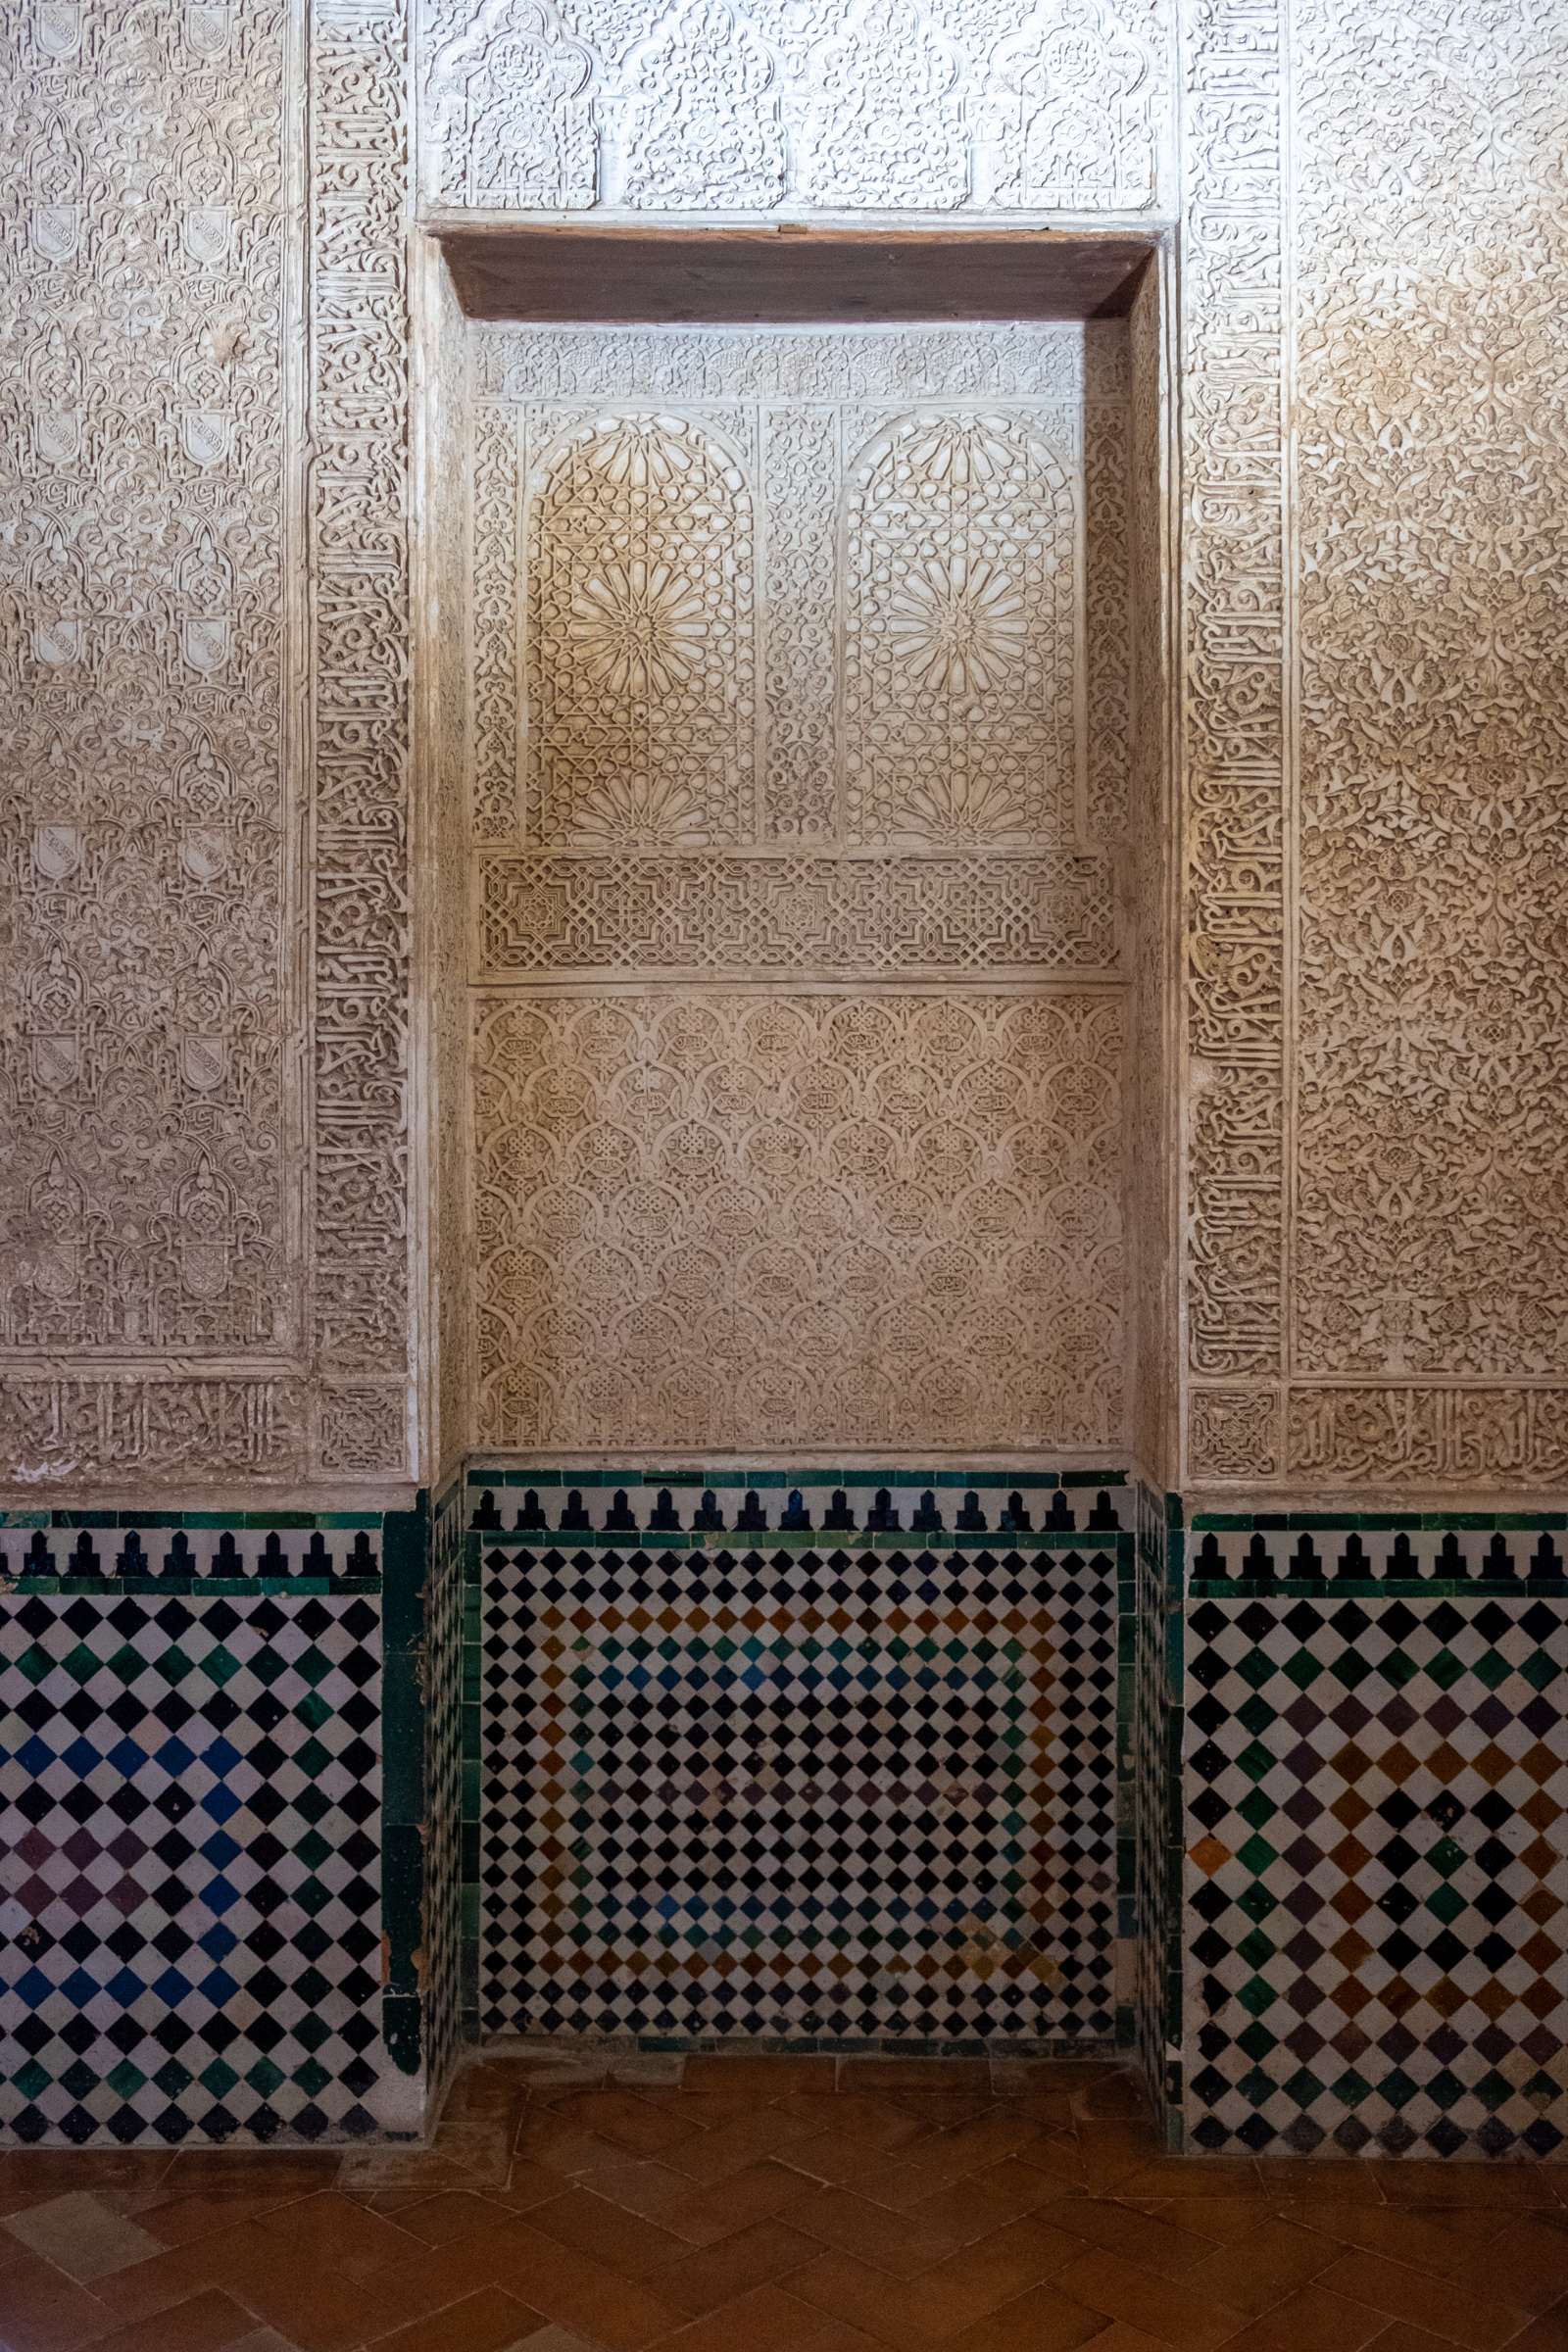 Tiles and pattern in a former doorway, Nasrid Palace, The Alhambra, Granada